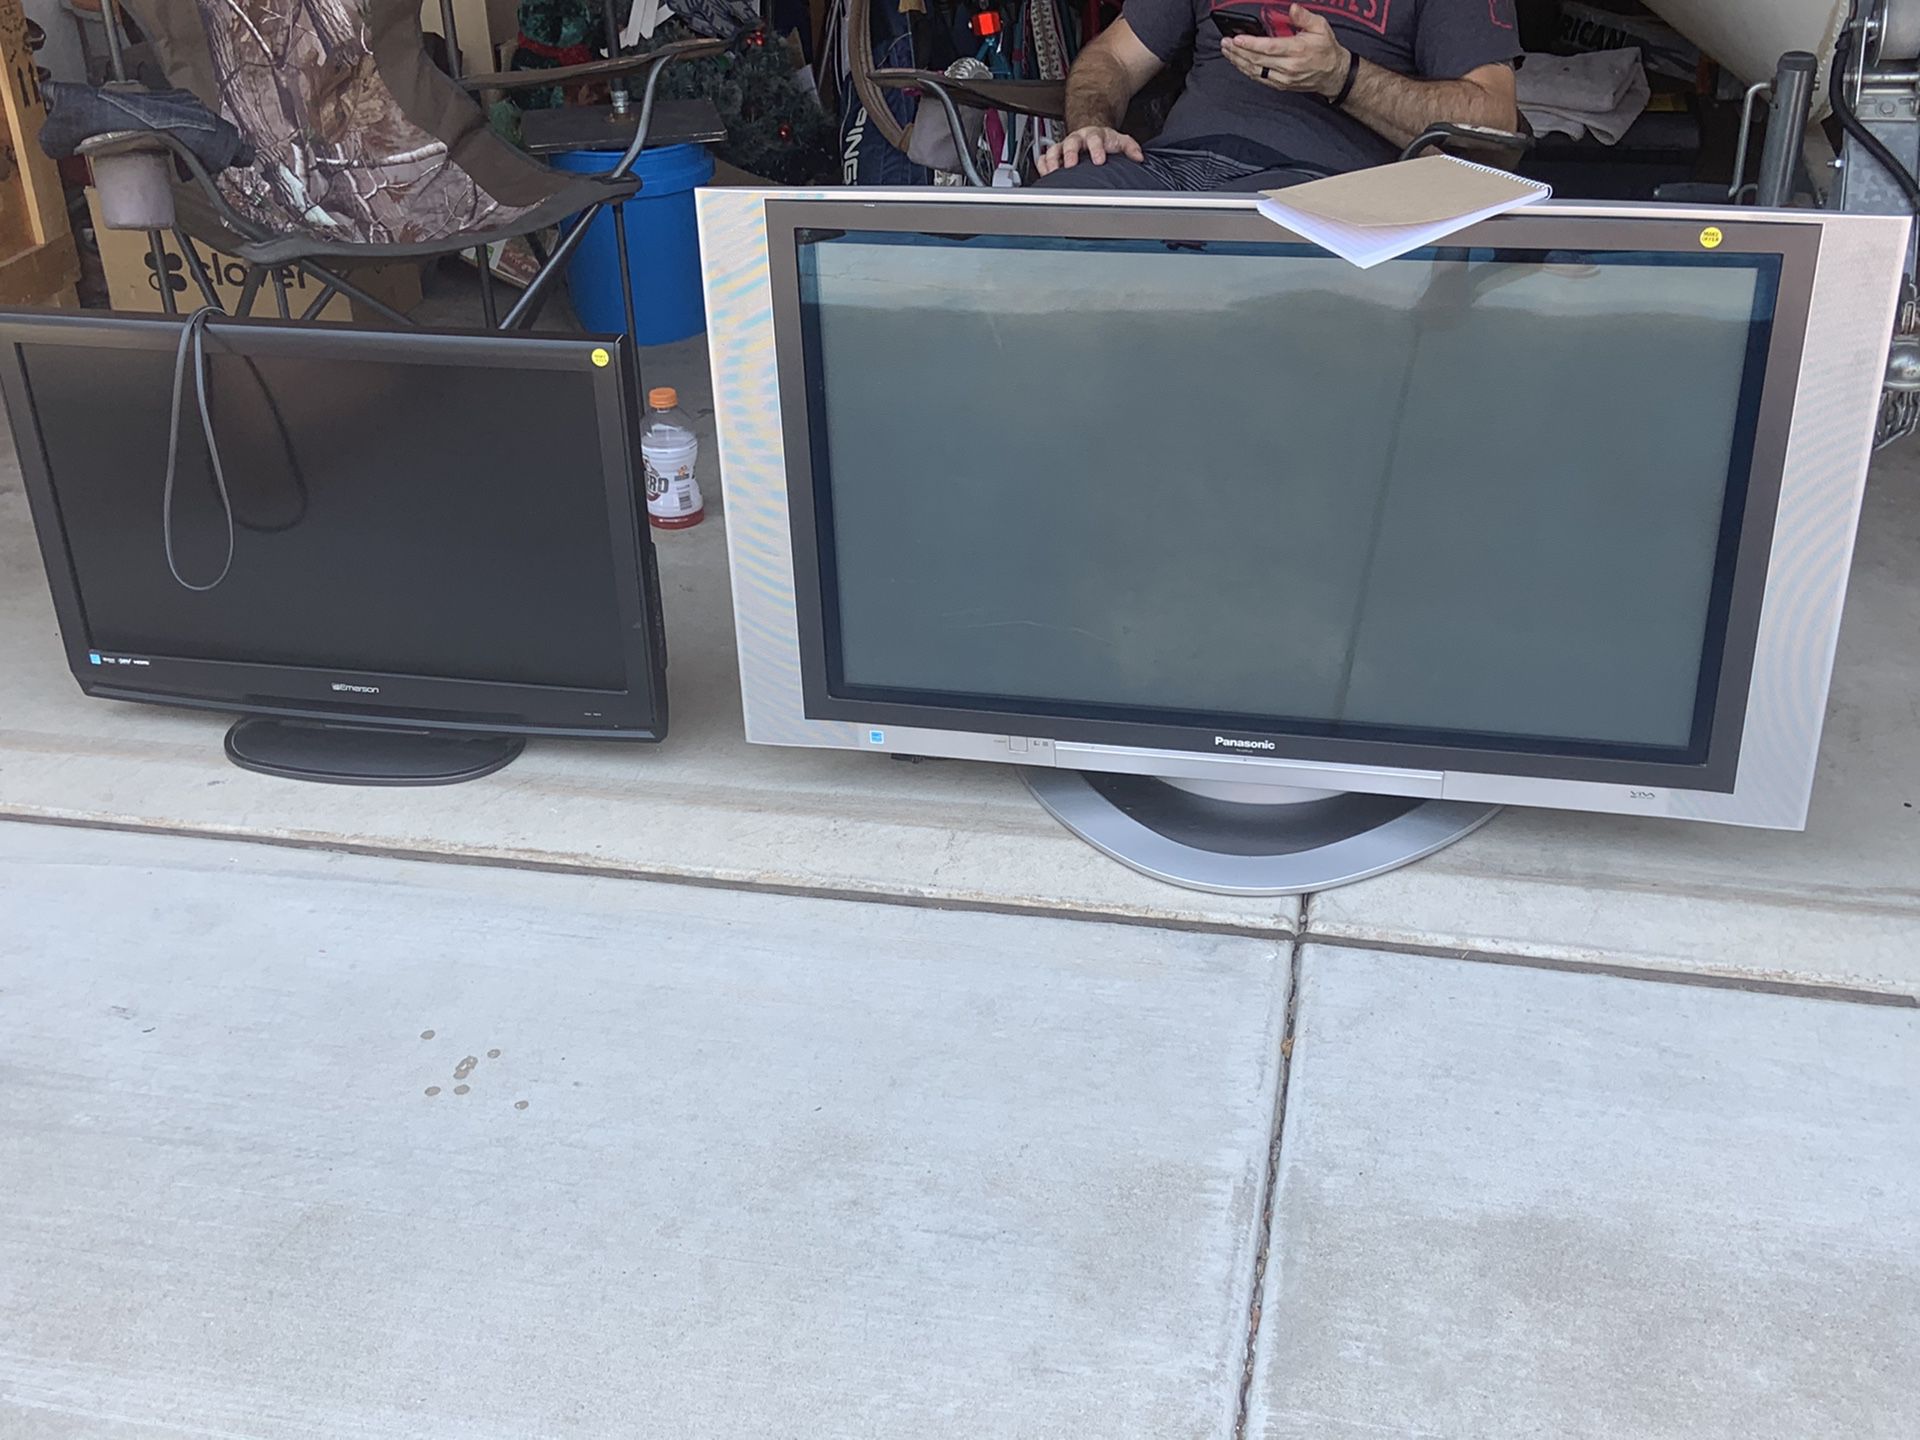 Two TVs need gone today! Emerson 32 inch, Panasonic 42 inch.